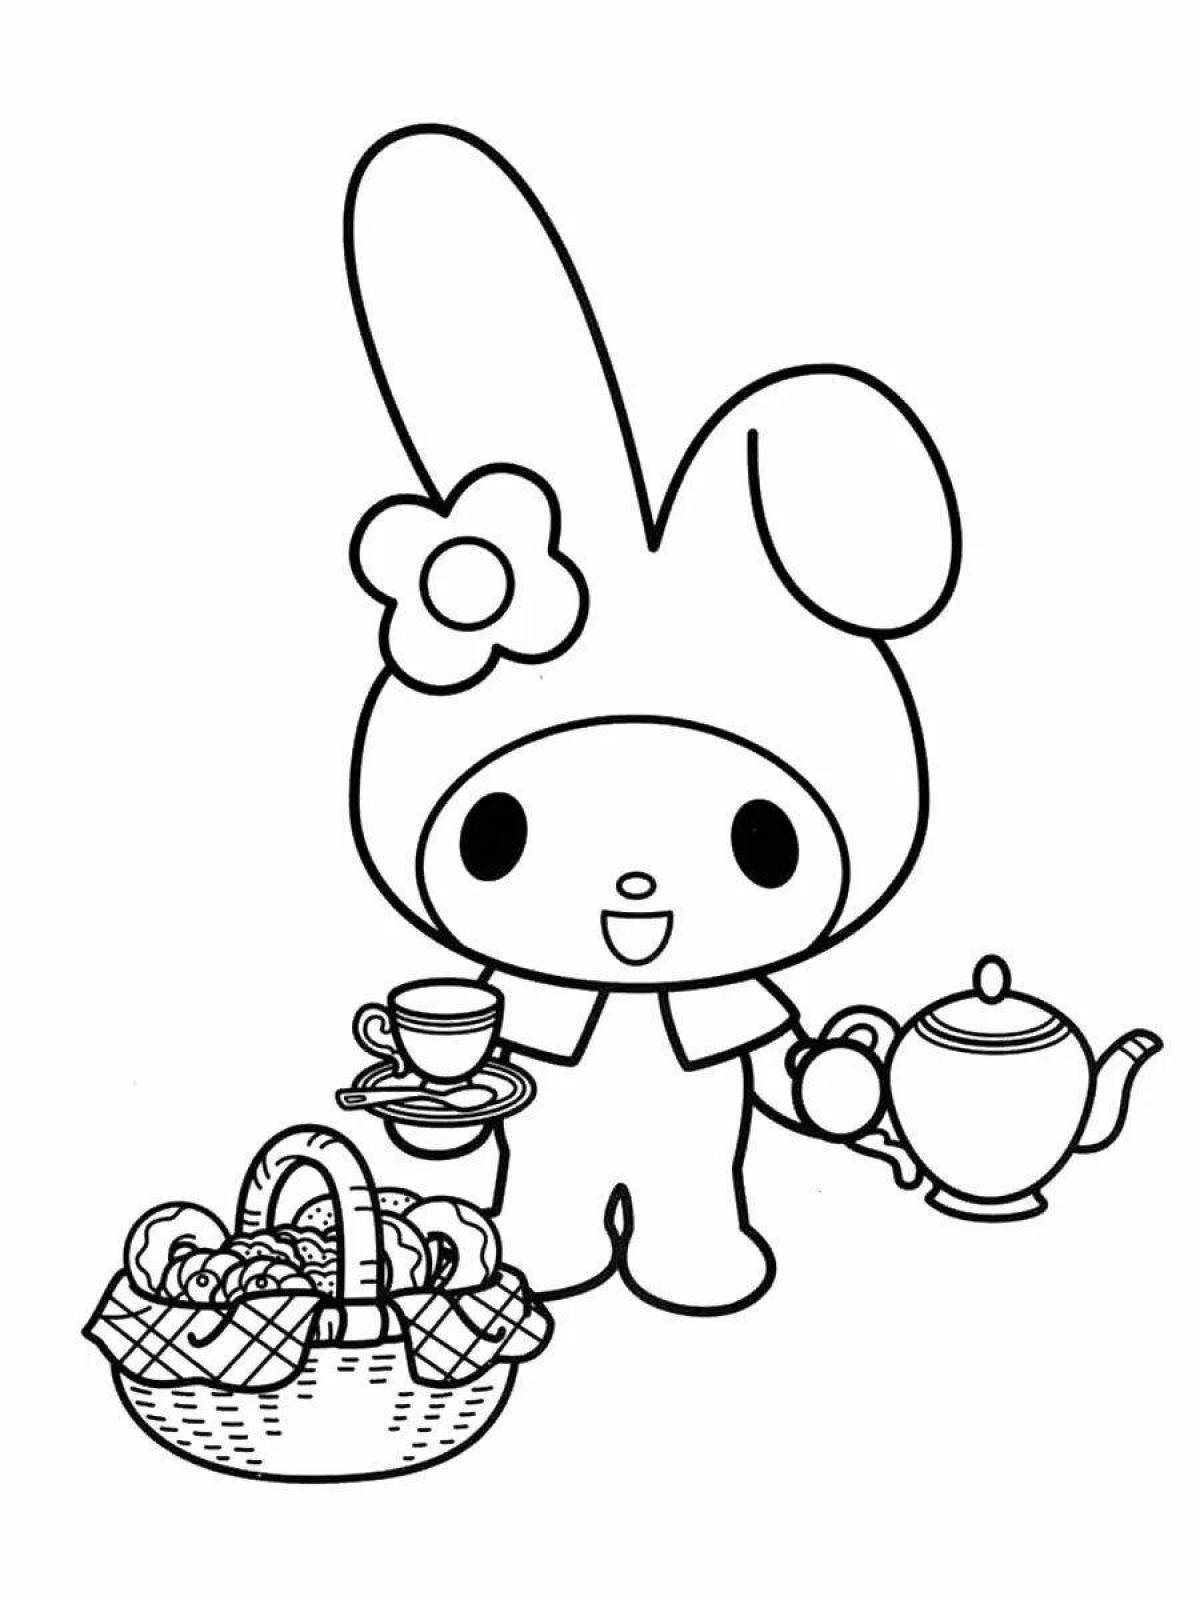 Joyous melody and hello kitty coloring book